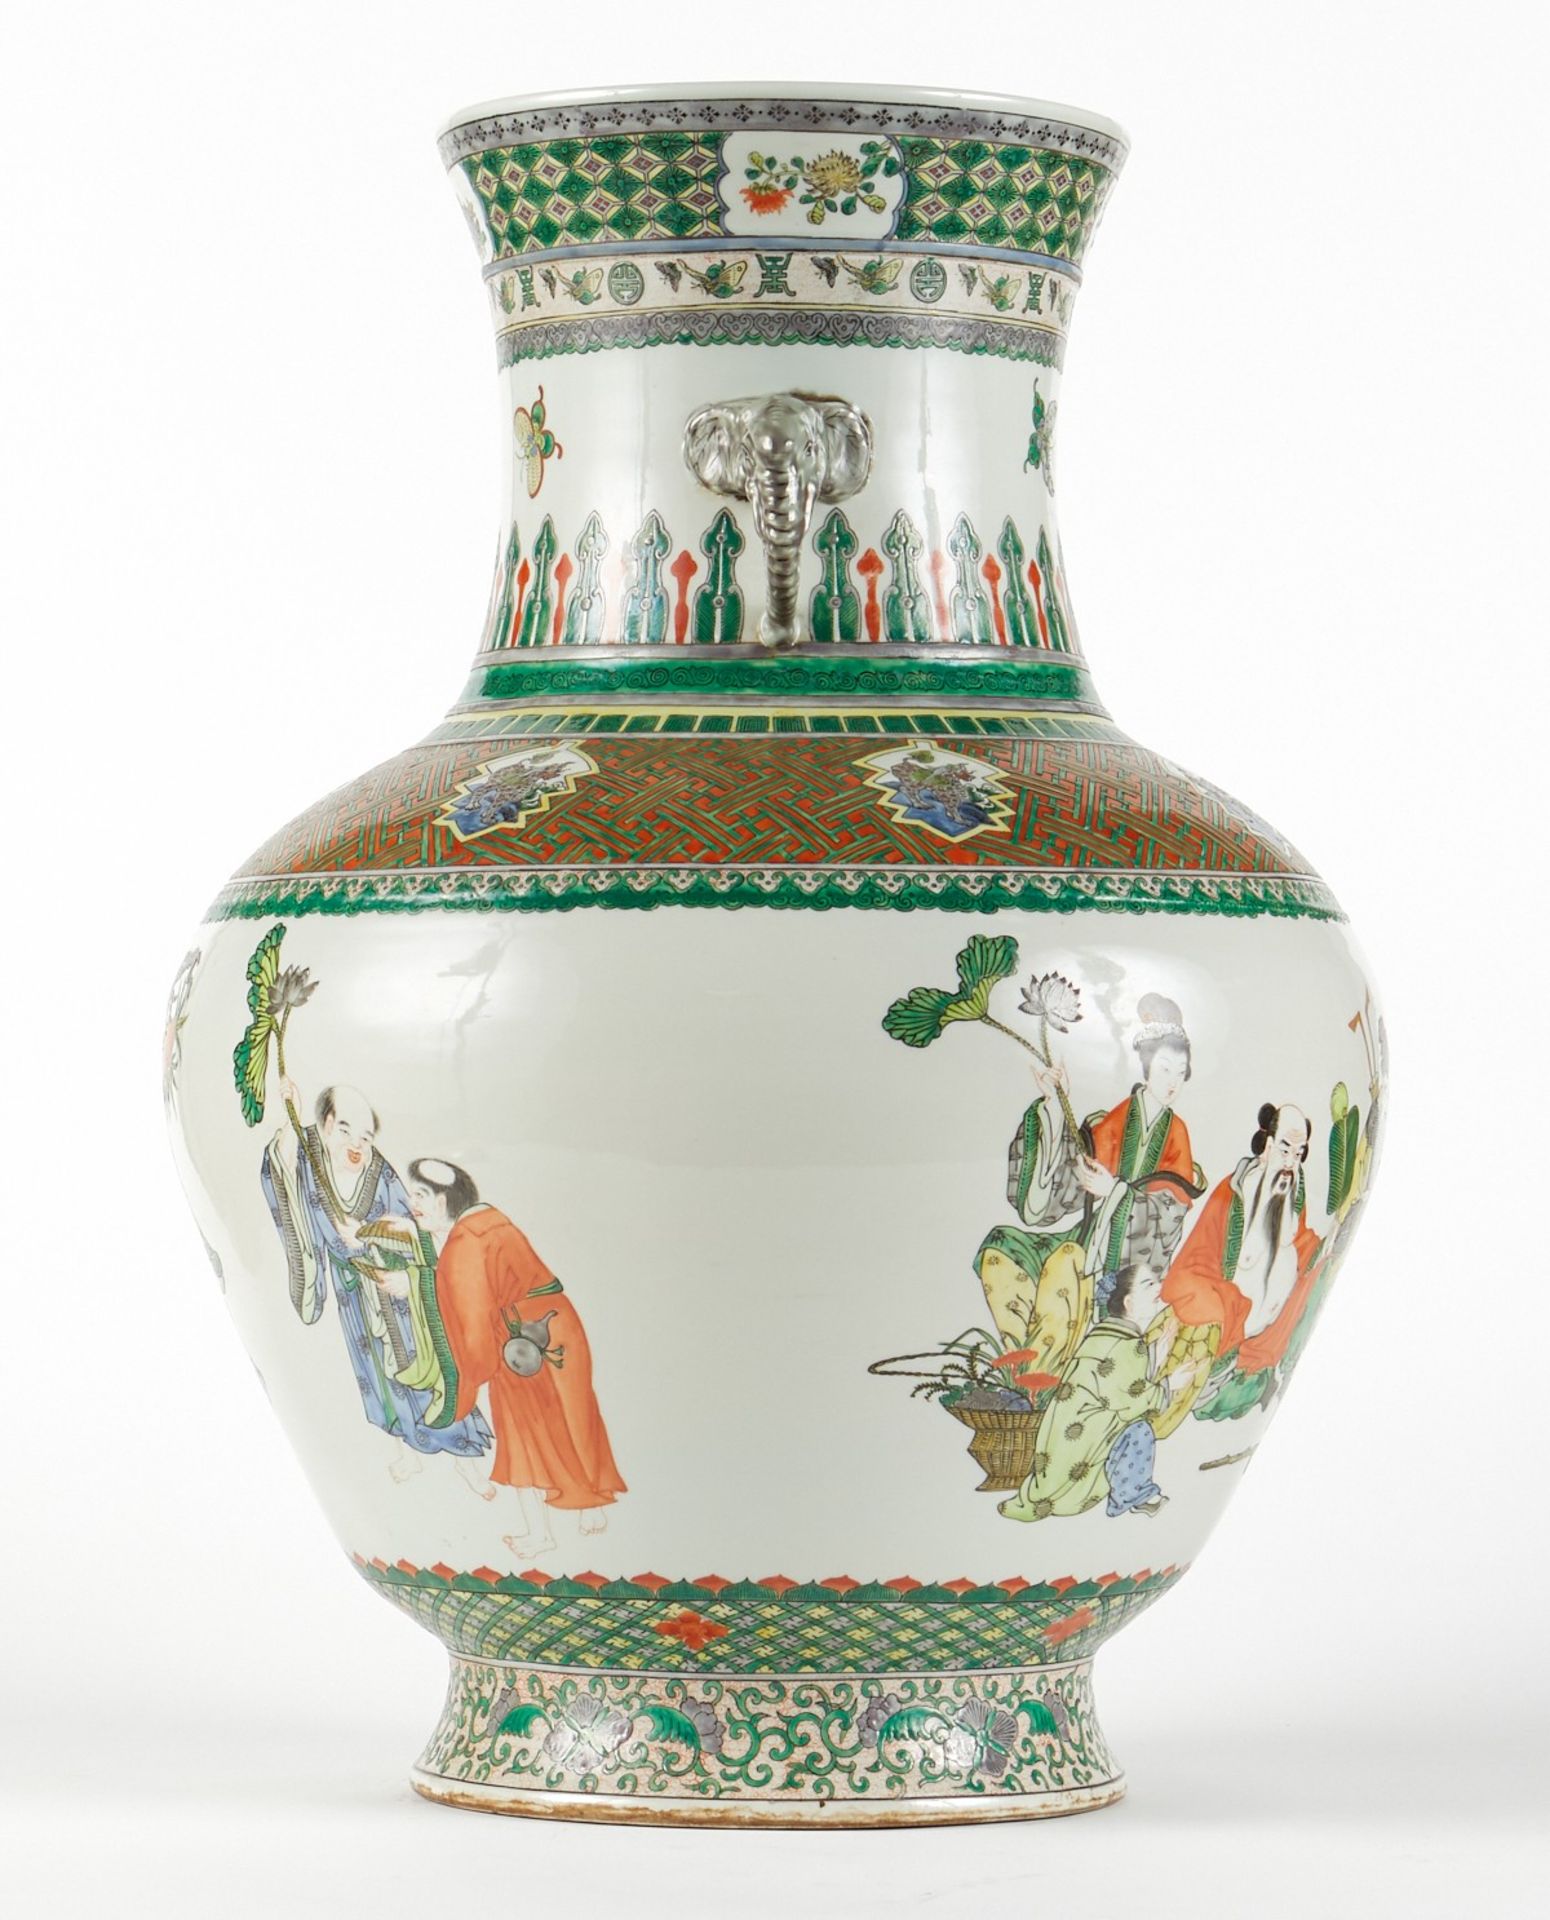 Enormous Chinese Famille Verte Vase - Image 3 of 11